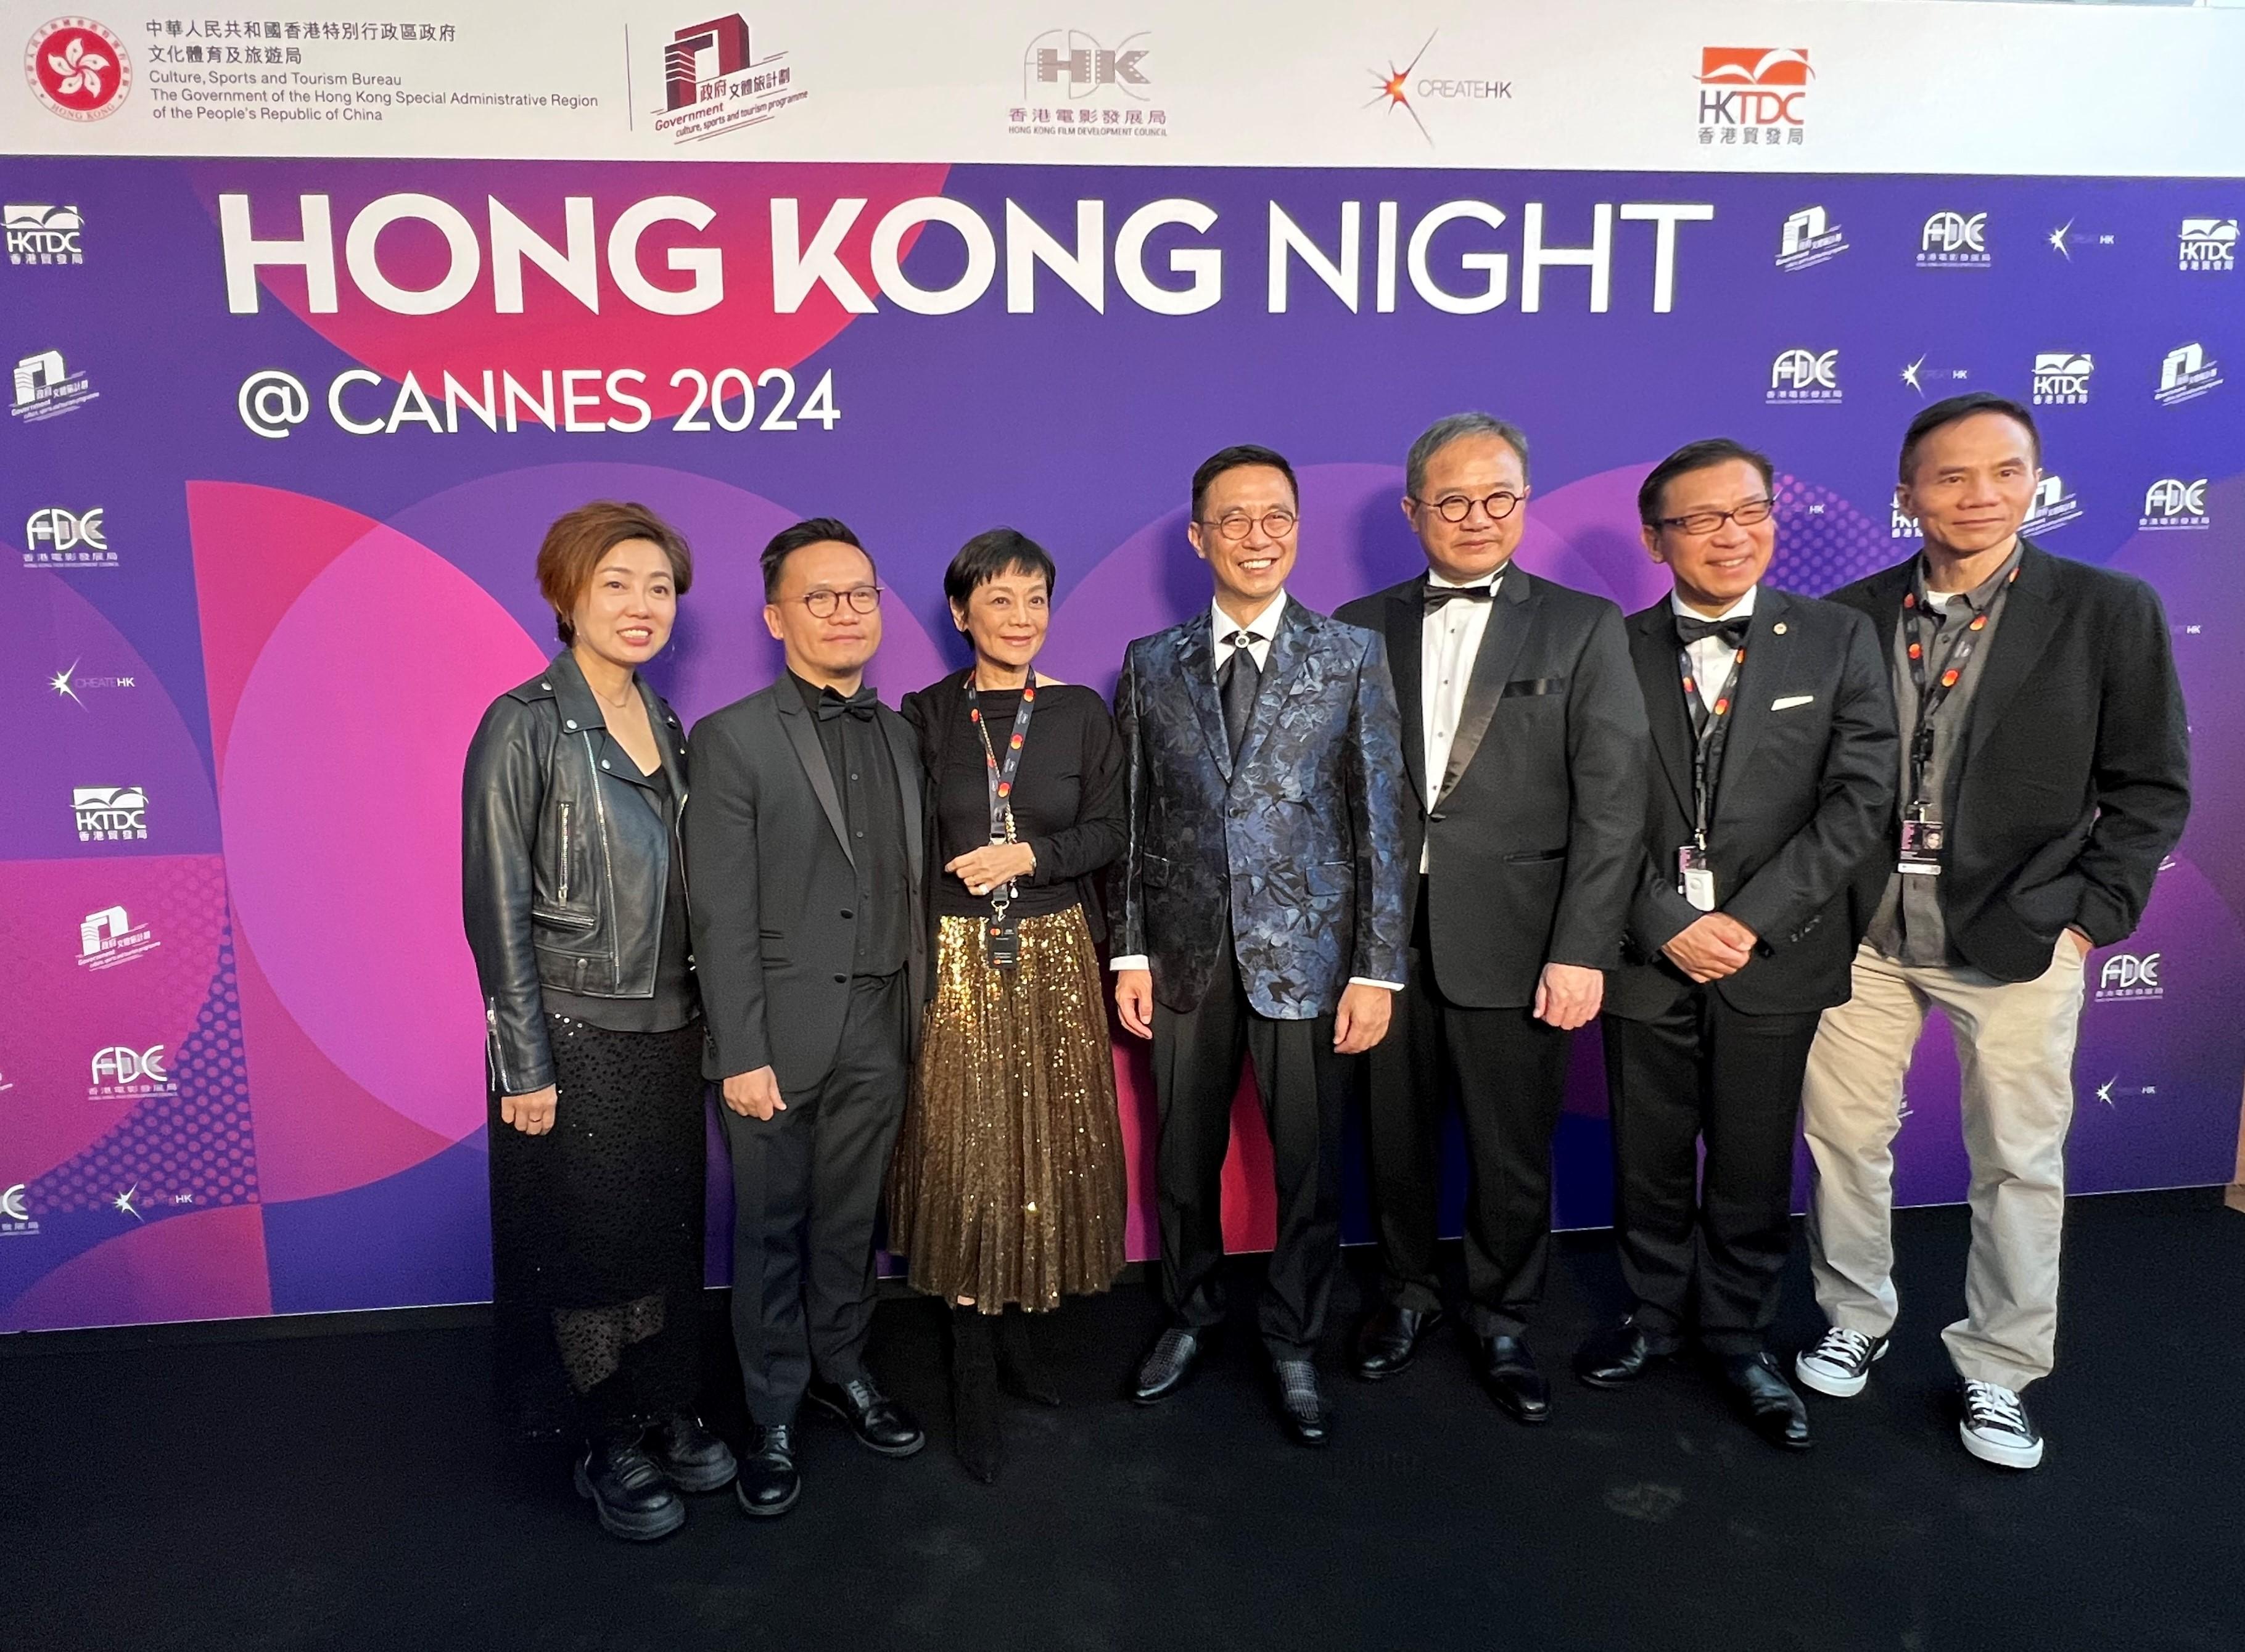 The Secretary for Culture, Sports and Tourism, Mr Kevin Yeung (centre), led a Hong Kong film industry delegation to the 77th Cannes Film Festival in France and attended the Hong Kong Night reception on May 16 (Cannes time). The Permanent Secretary for Culture, Sports and Tourism, Mr Joe Wong (third right), and Assistant Head of Create Hong Kong Mr Gary Mak (second left), were also present.